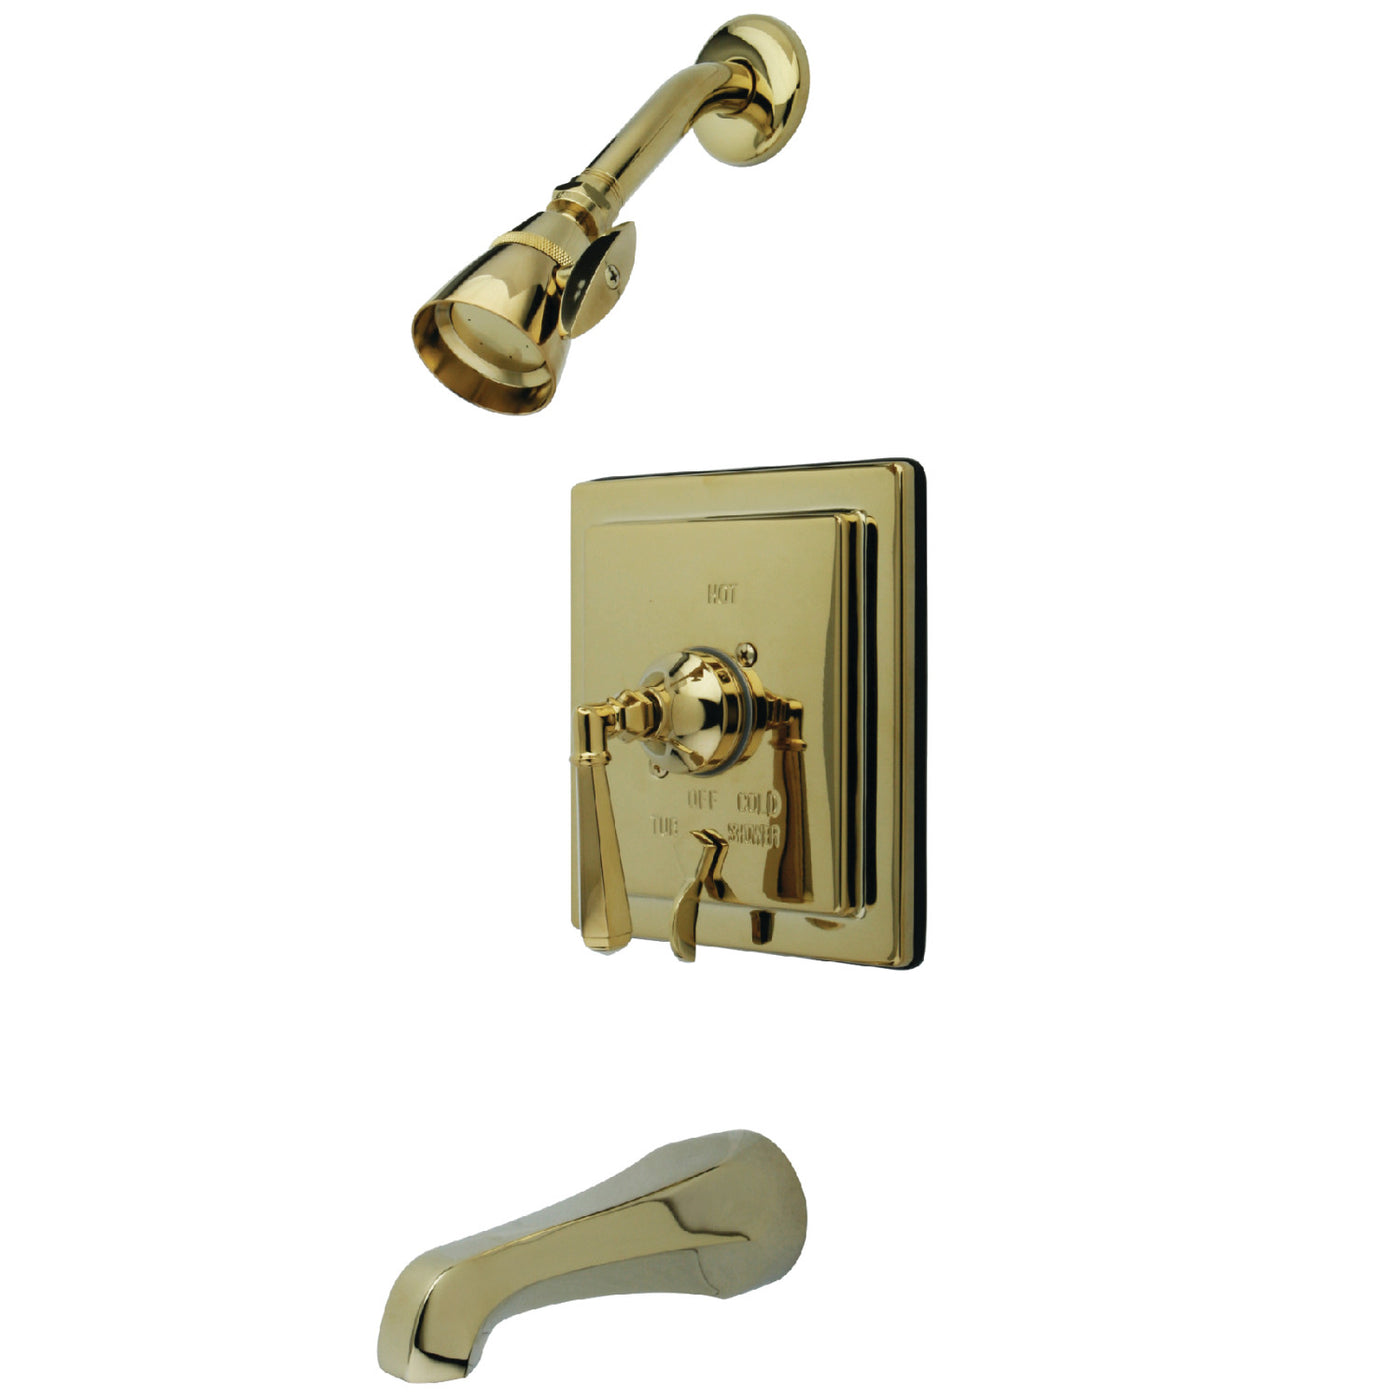 Elements of Design EB86524HL Tub and Shower Faucet with Diverter, Polished Brass